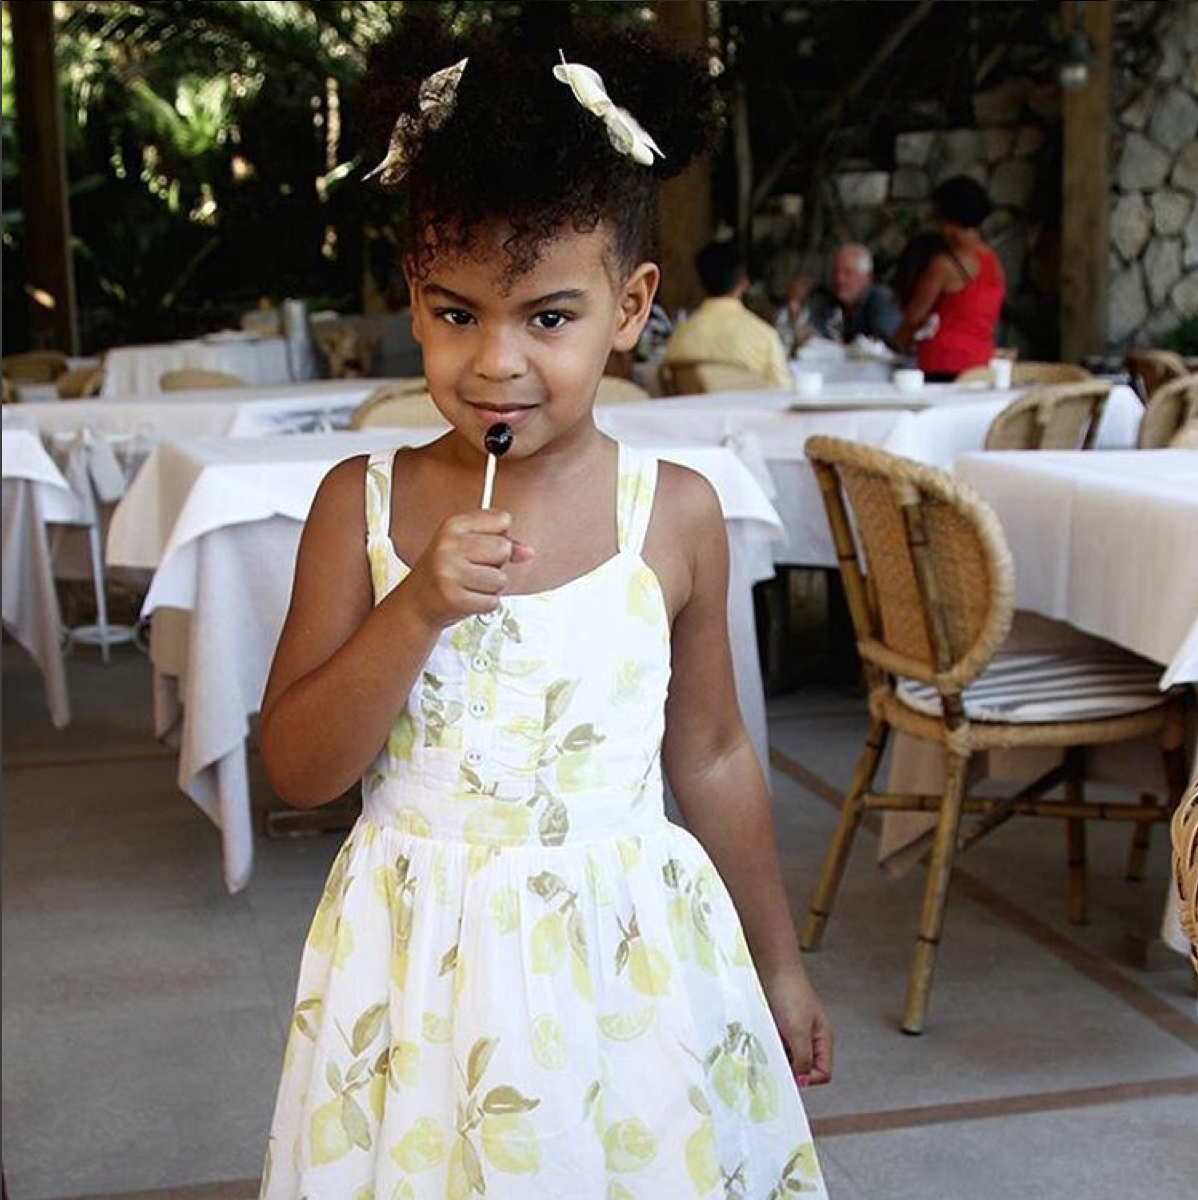 Blue Ivy's Adorable Recital Pics Reveal She's A Star In The Making